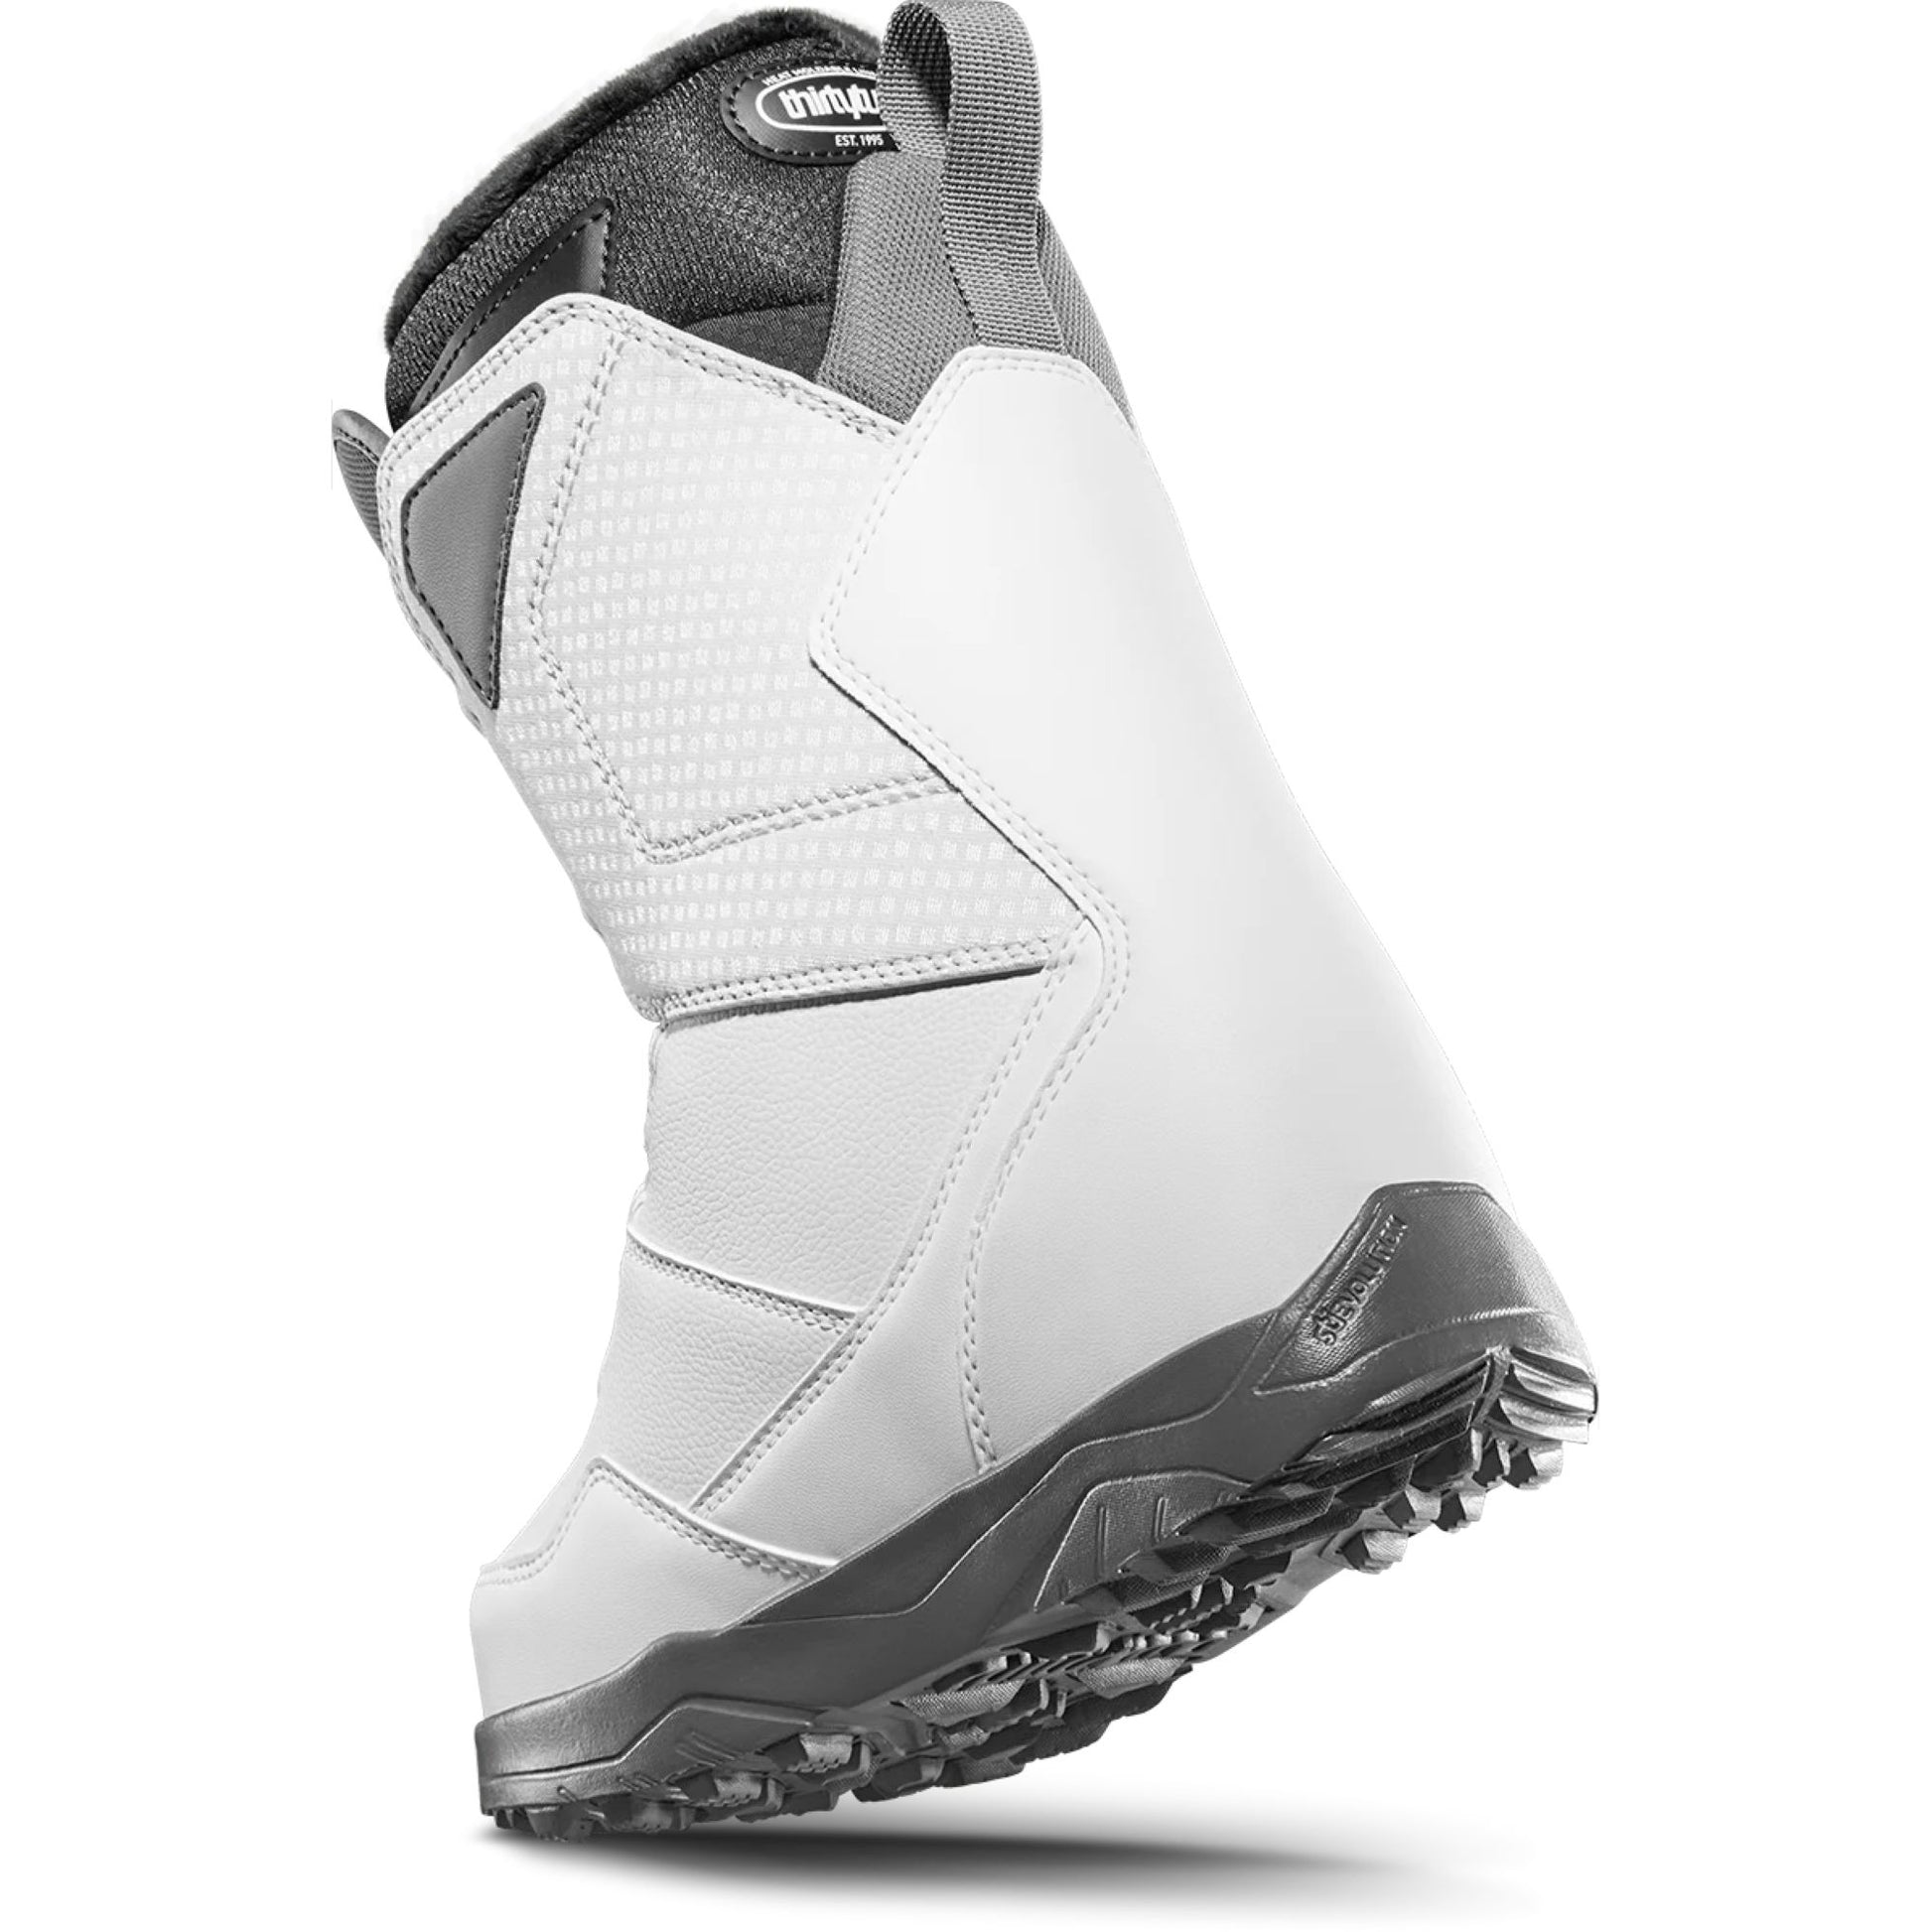 ThirtyTwo Women's Shifty BOA Snowboard Boots White/Grey Snowboard Boots